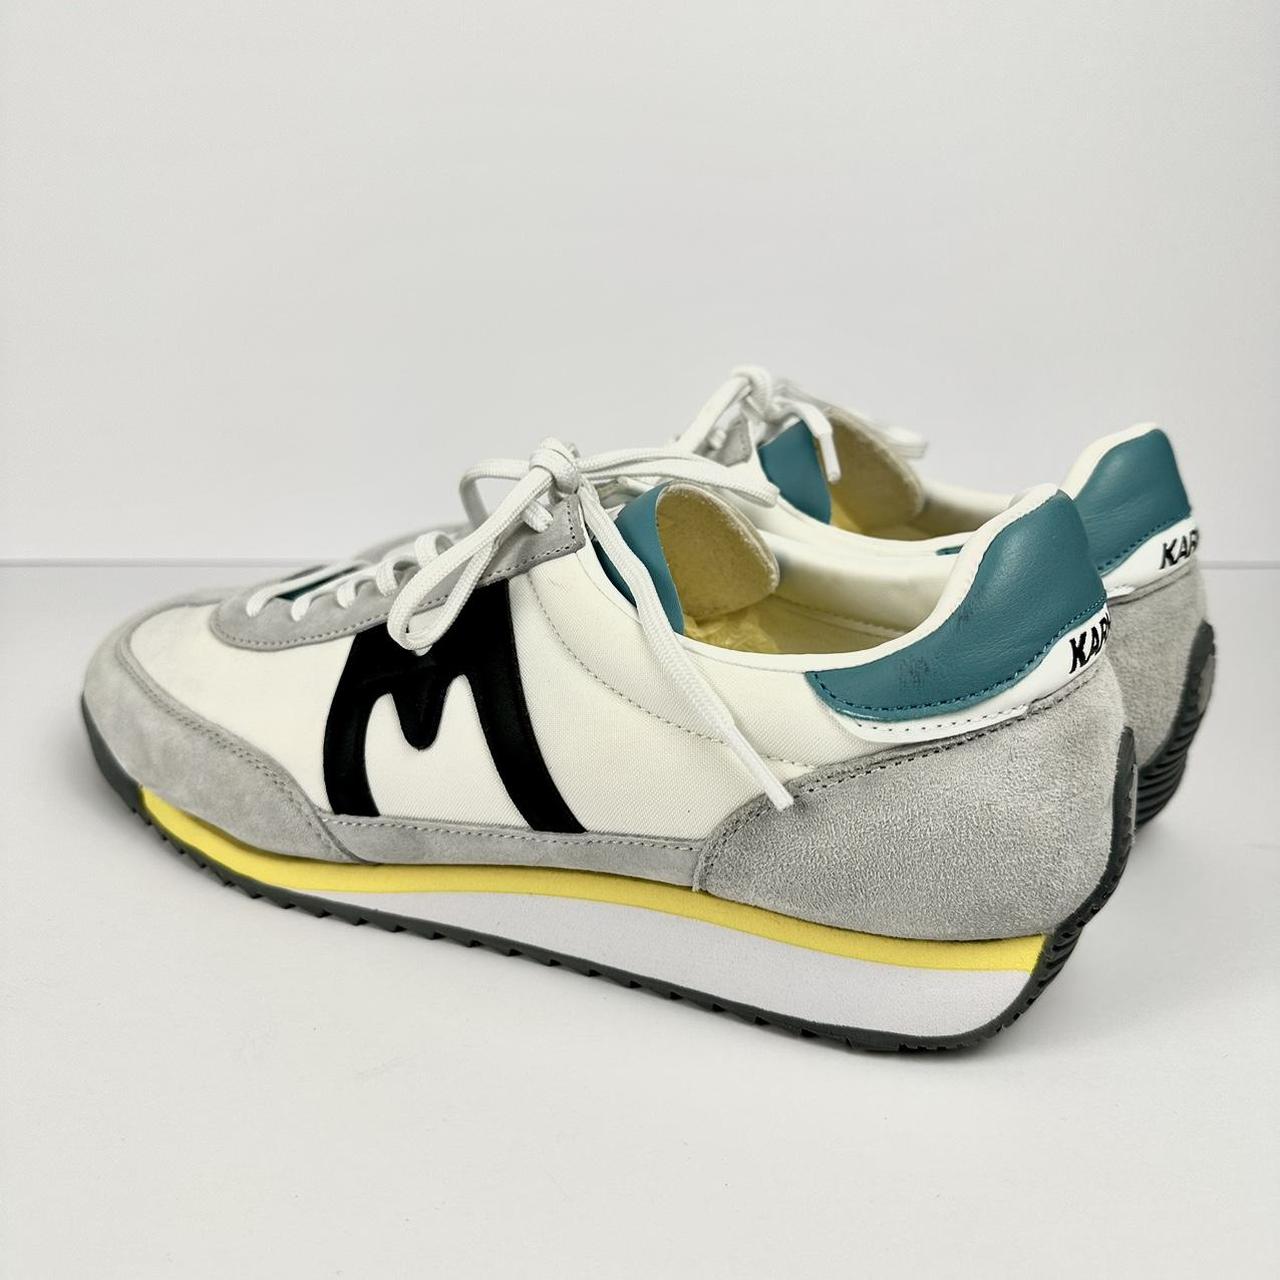 Karhu Men's White and Blue Trainers (7)